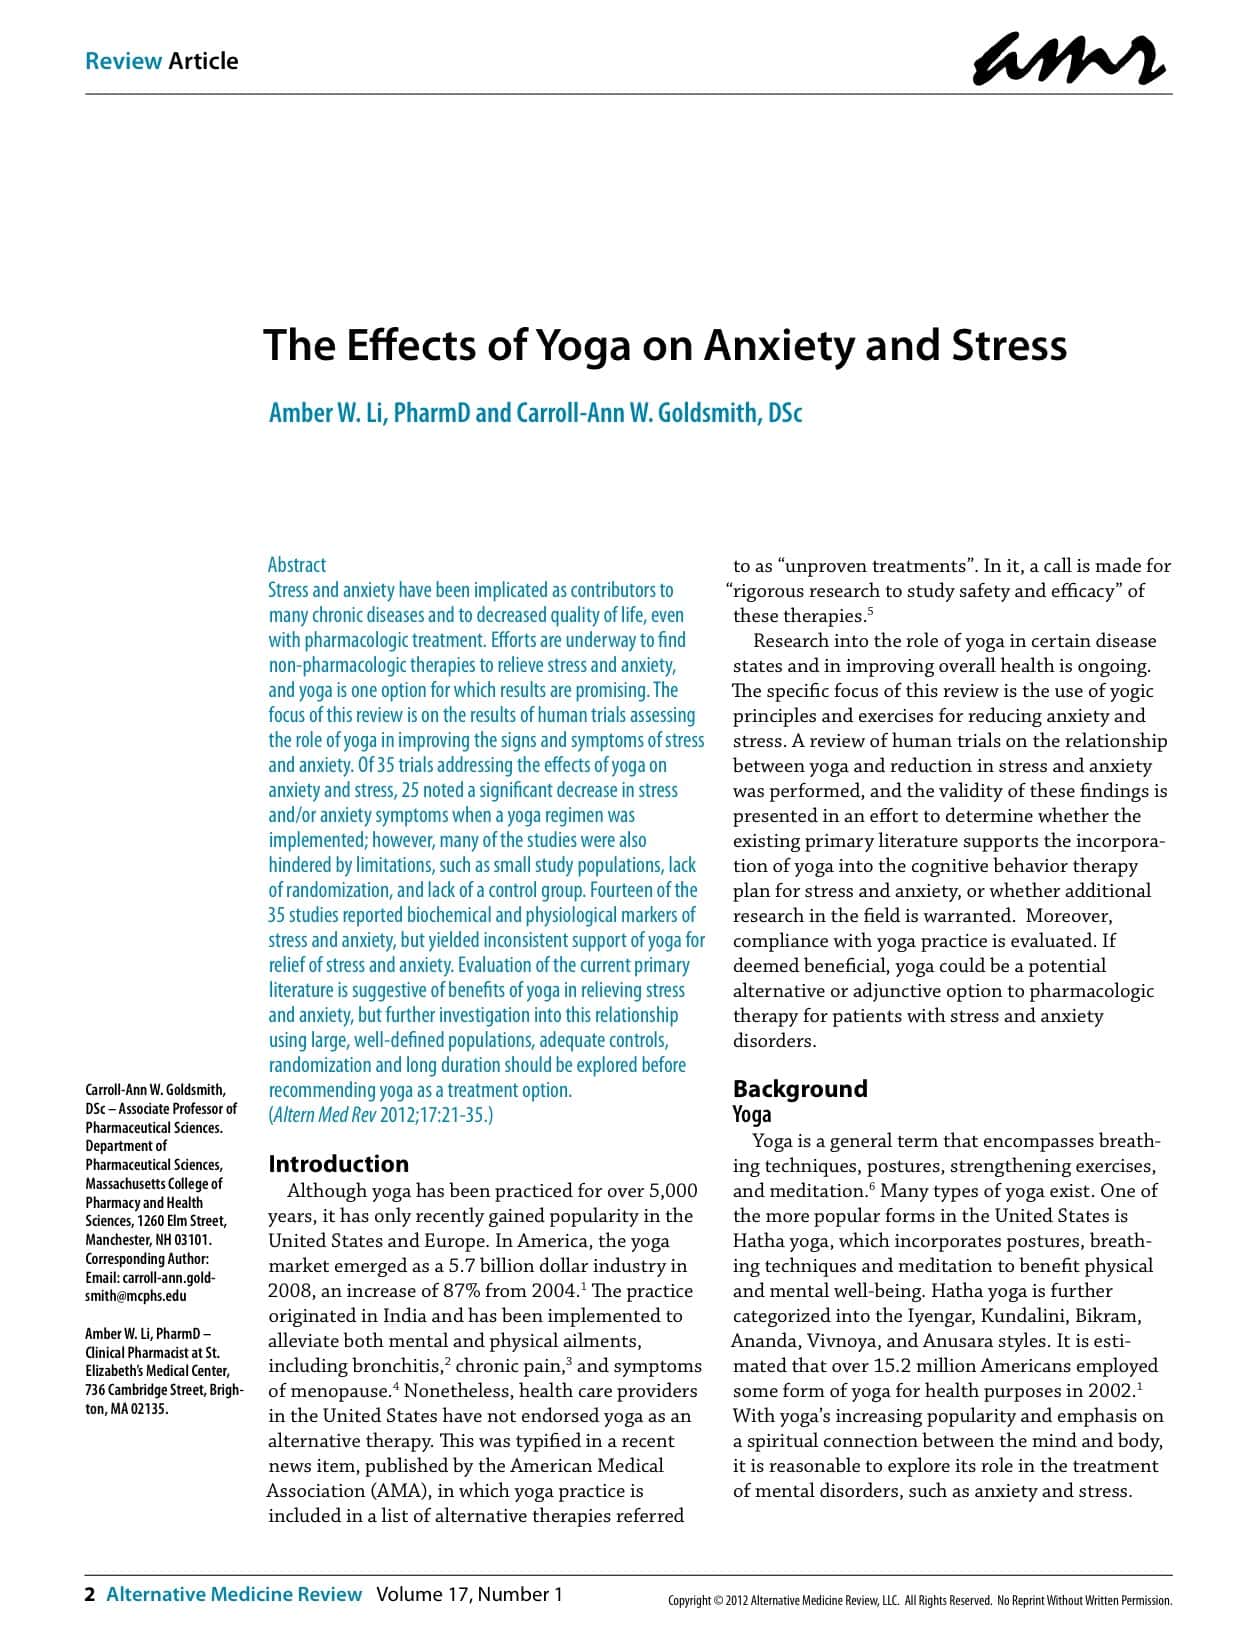 yoga for anxiety a systematic review of the research evidence